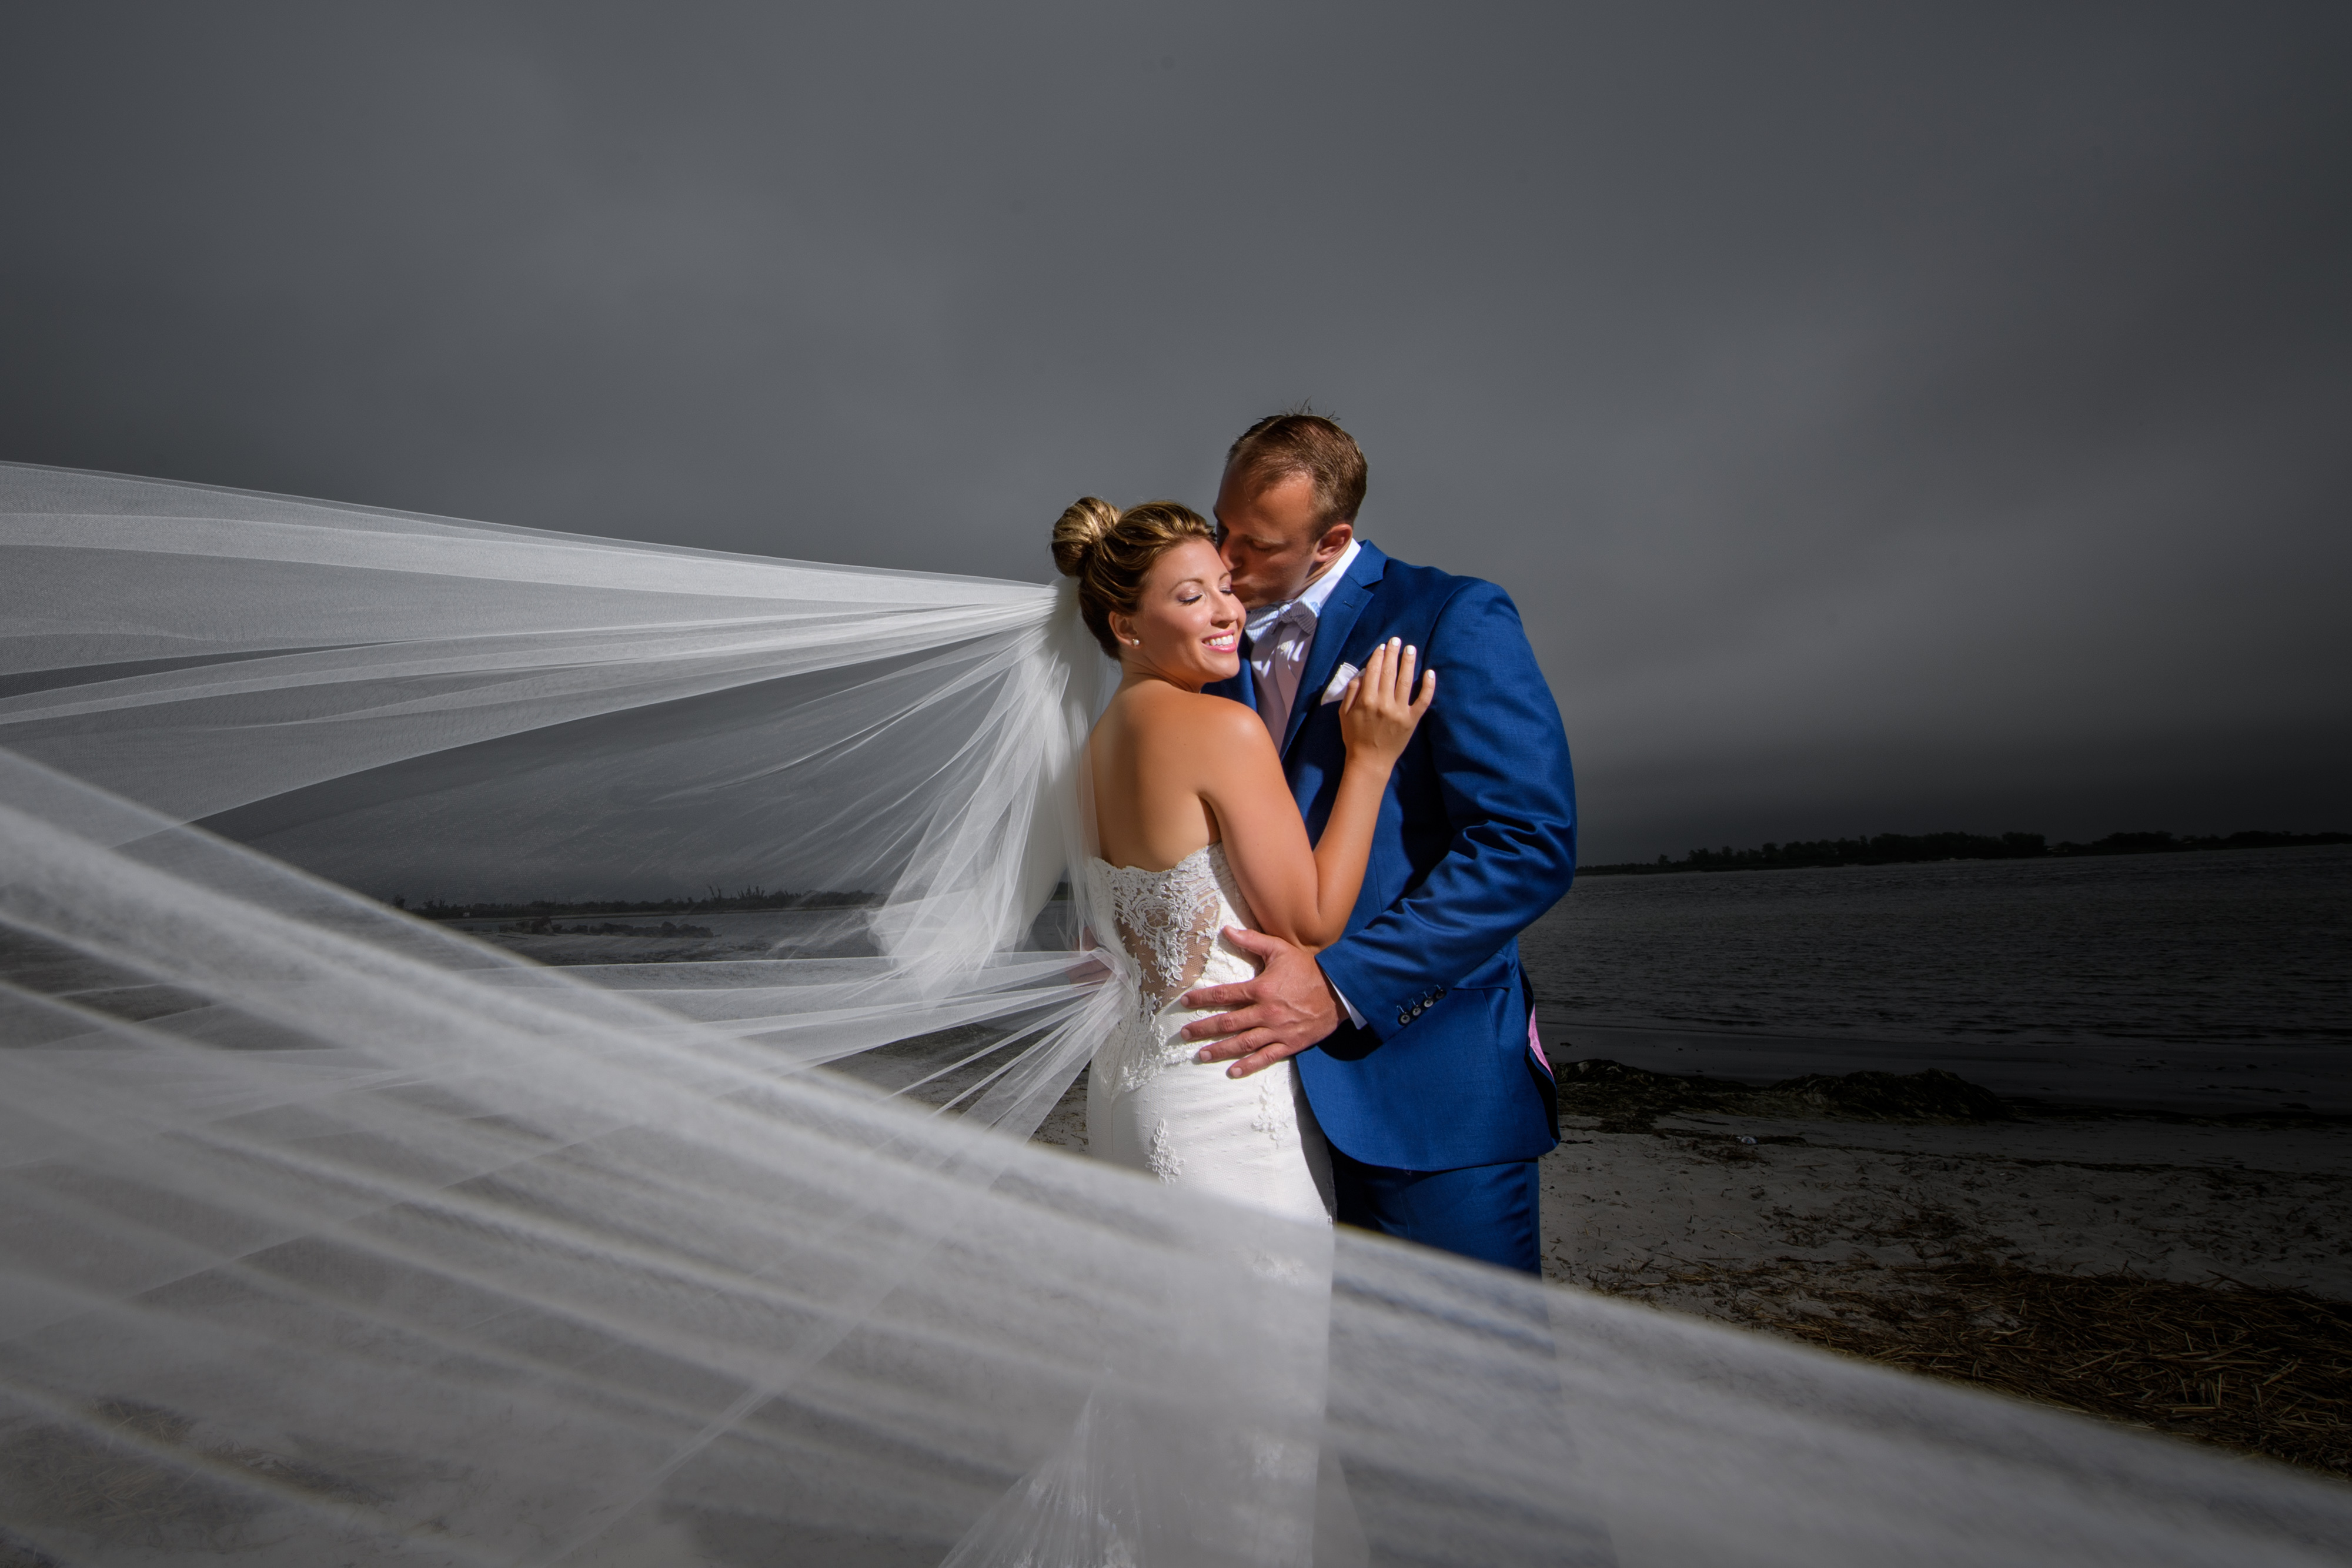 Bride and Groom at Sands at Lido Beach | Lotus Wedding Photography